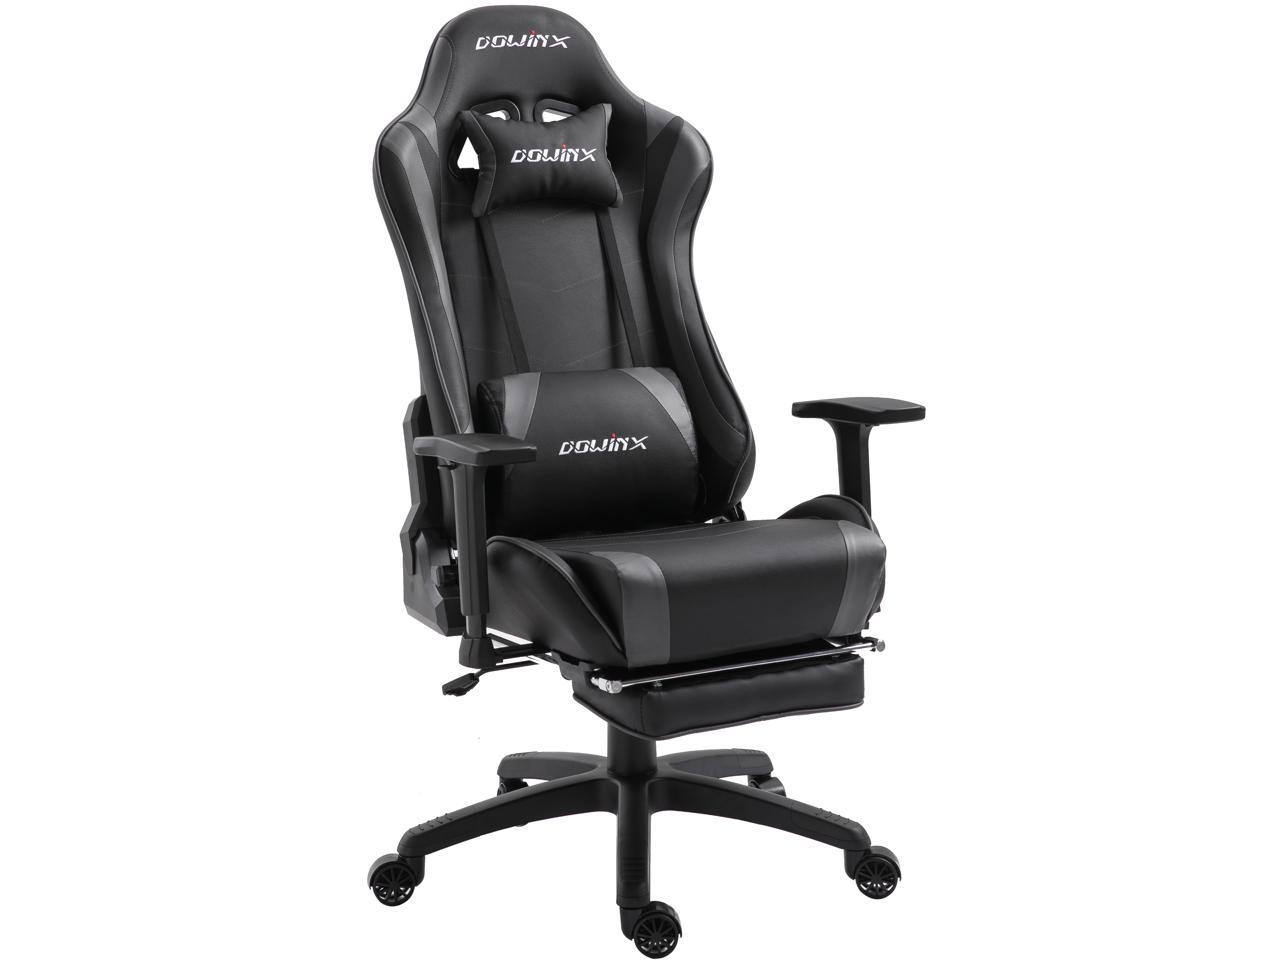 Dowinx Gaming Chair Ergonomic Office Recliner For Computer With Massage Lumbar Support Racing Style Armchair Pu Leather E Sports Gamer Chairs With Retractable Footrest Black Grey Newegg Com